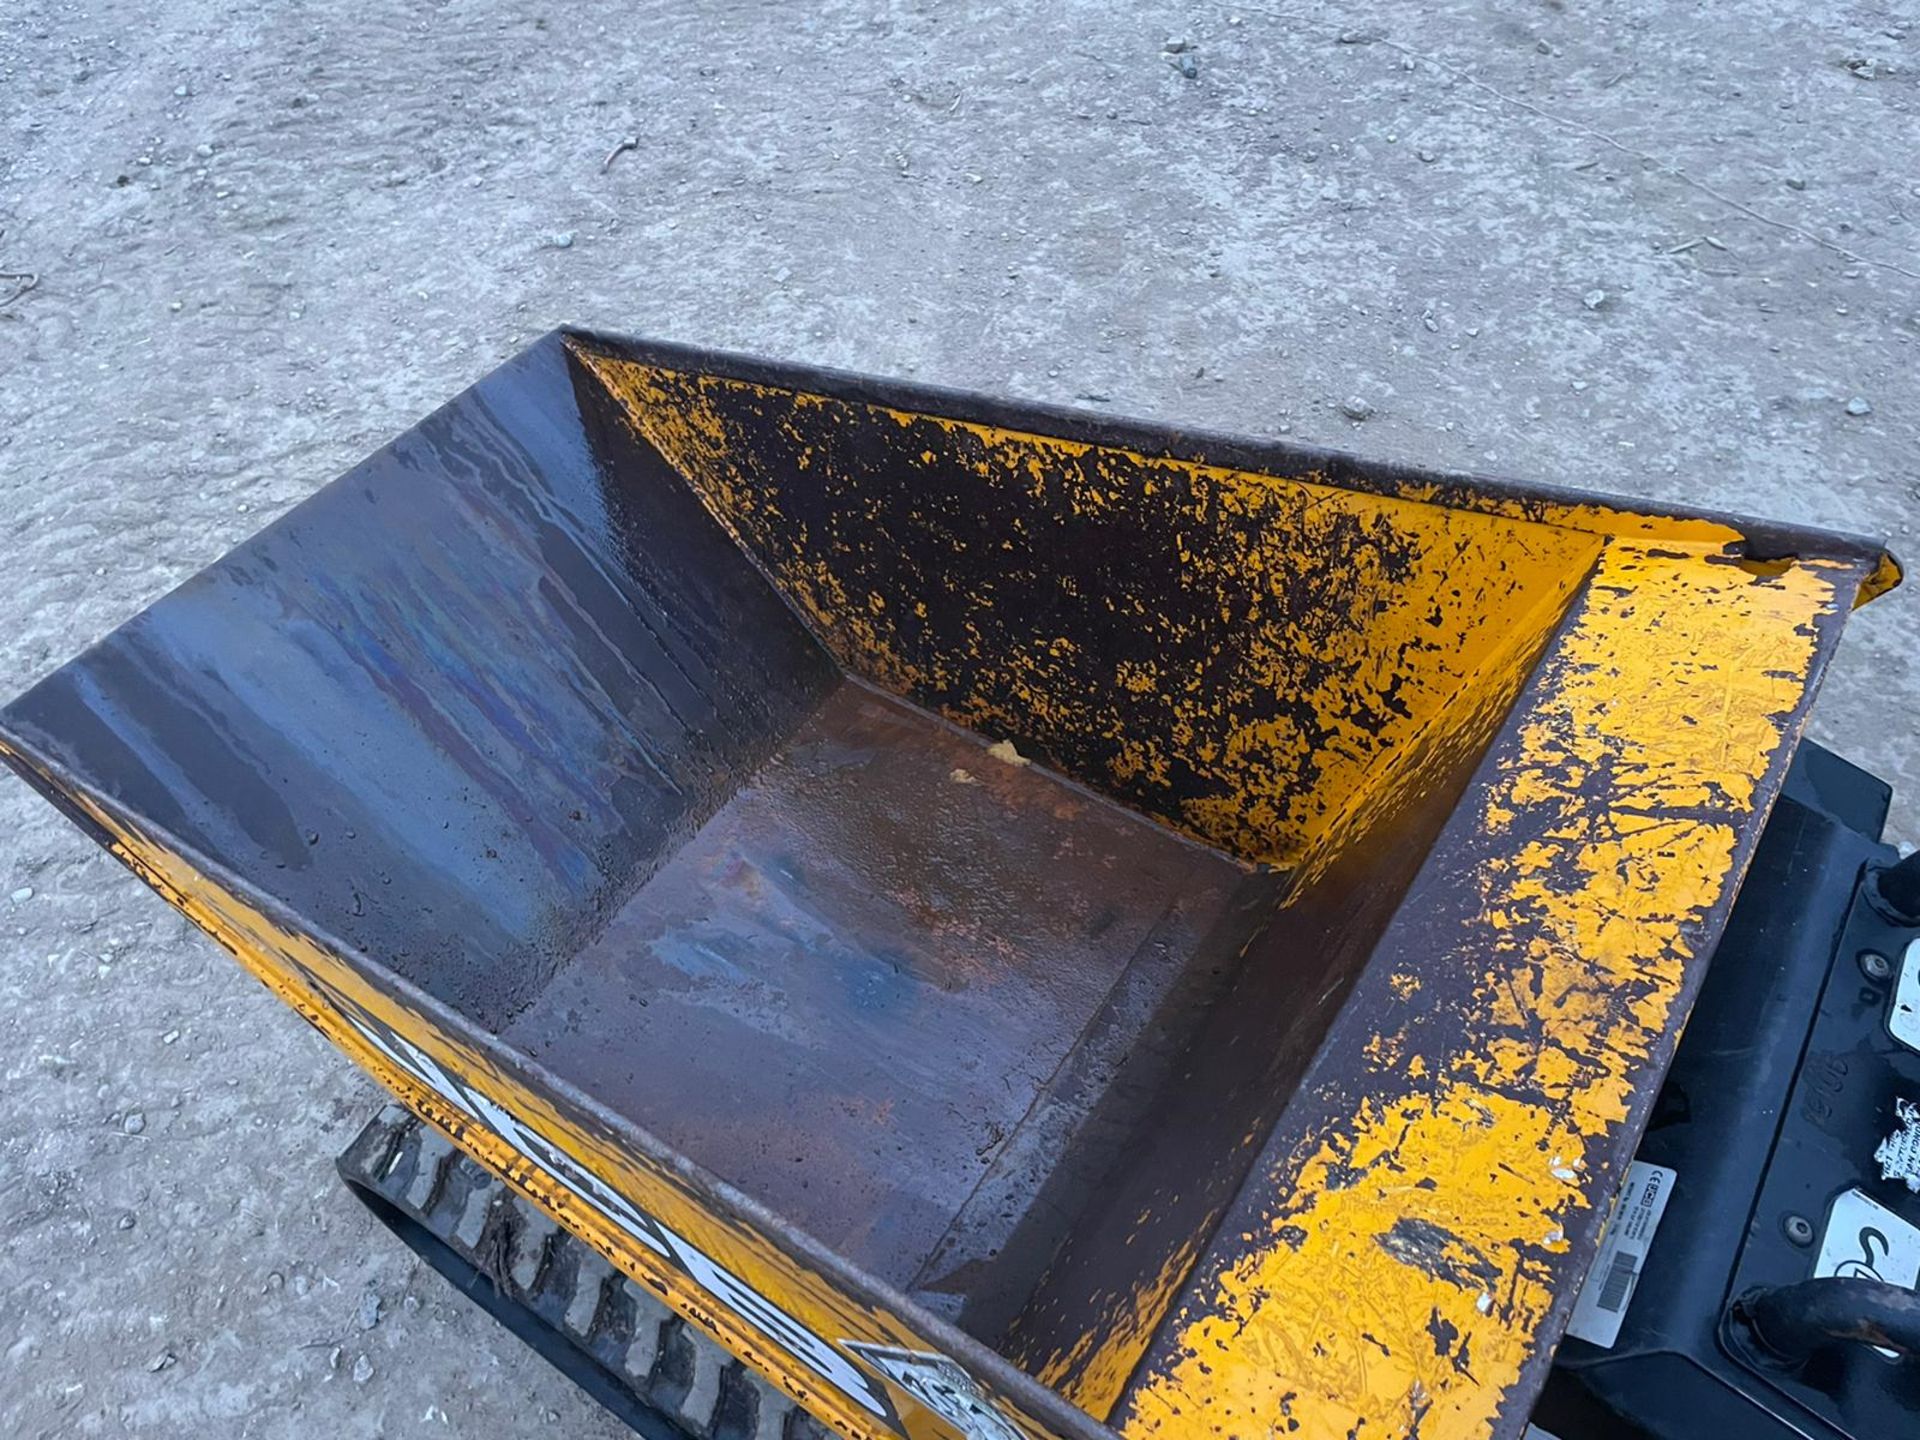 2019 JCB HTD-5 DIESEL TRACKED DUMPER, RUNS DRIVES AND DUMPS, 2 SPEED TRACKING, ELECTRIC START - Image 11 of 13